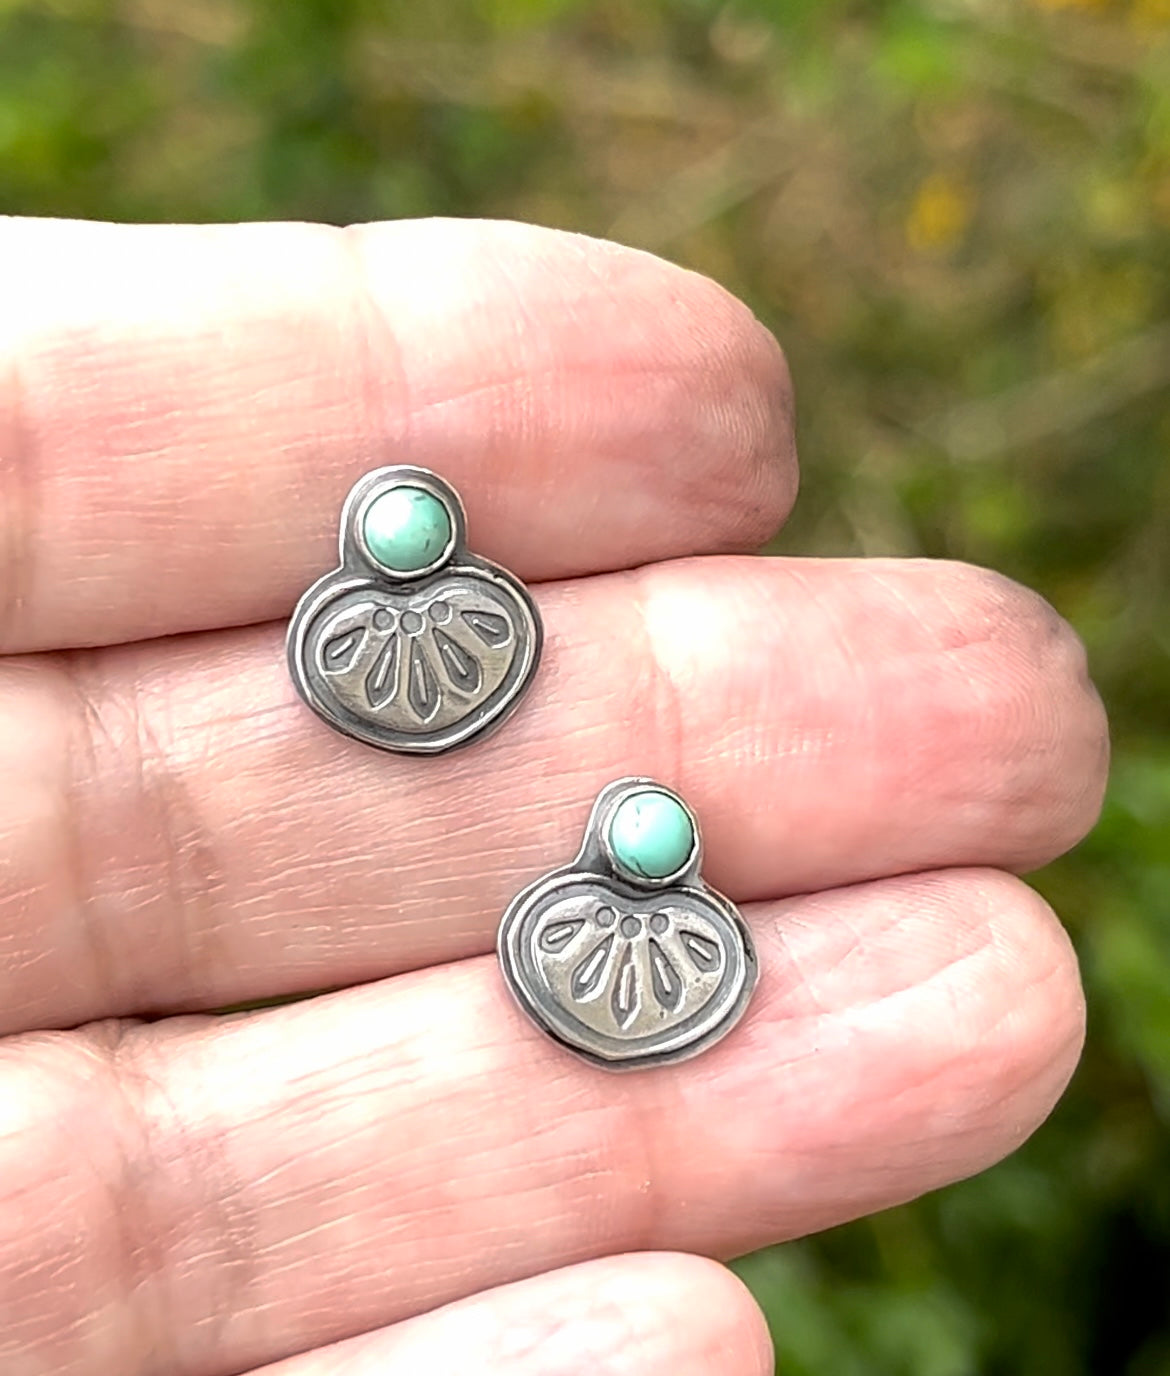 Stamped Sterling & Turquoise Post Earrings